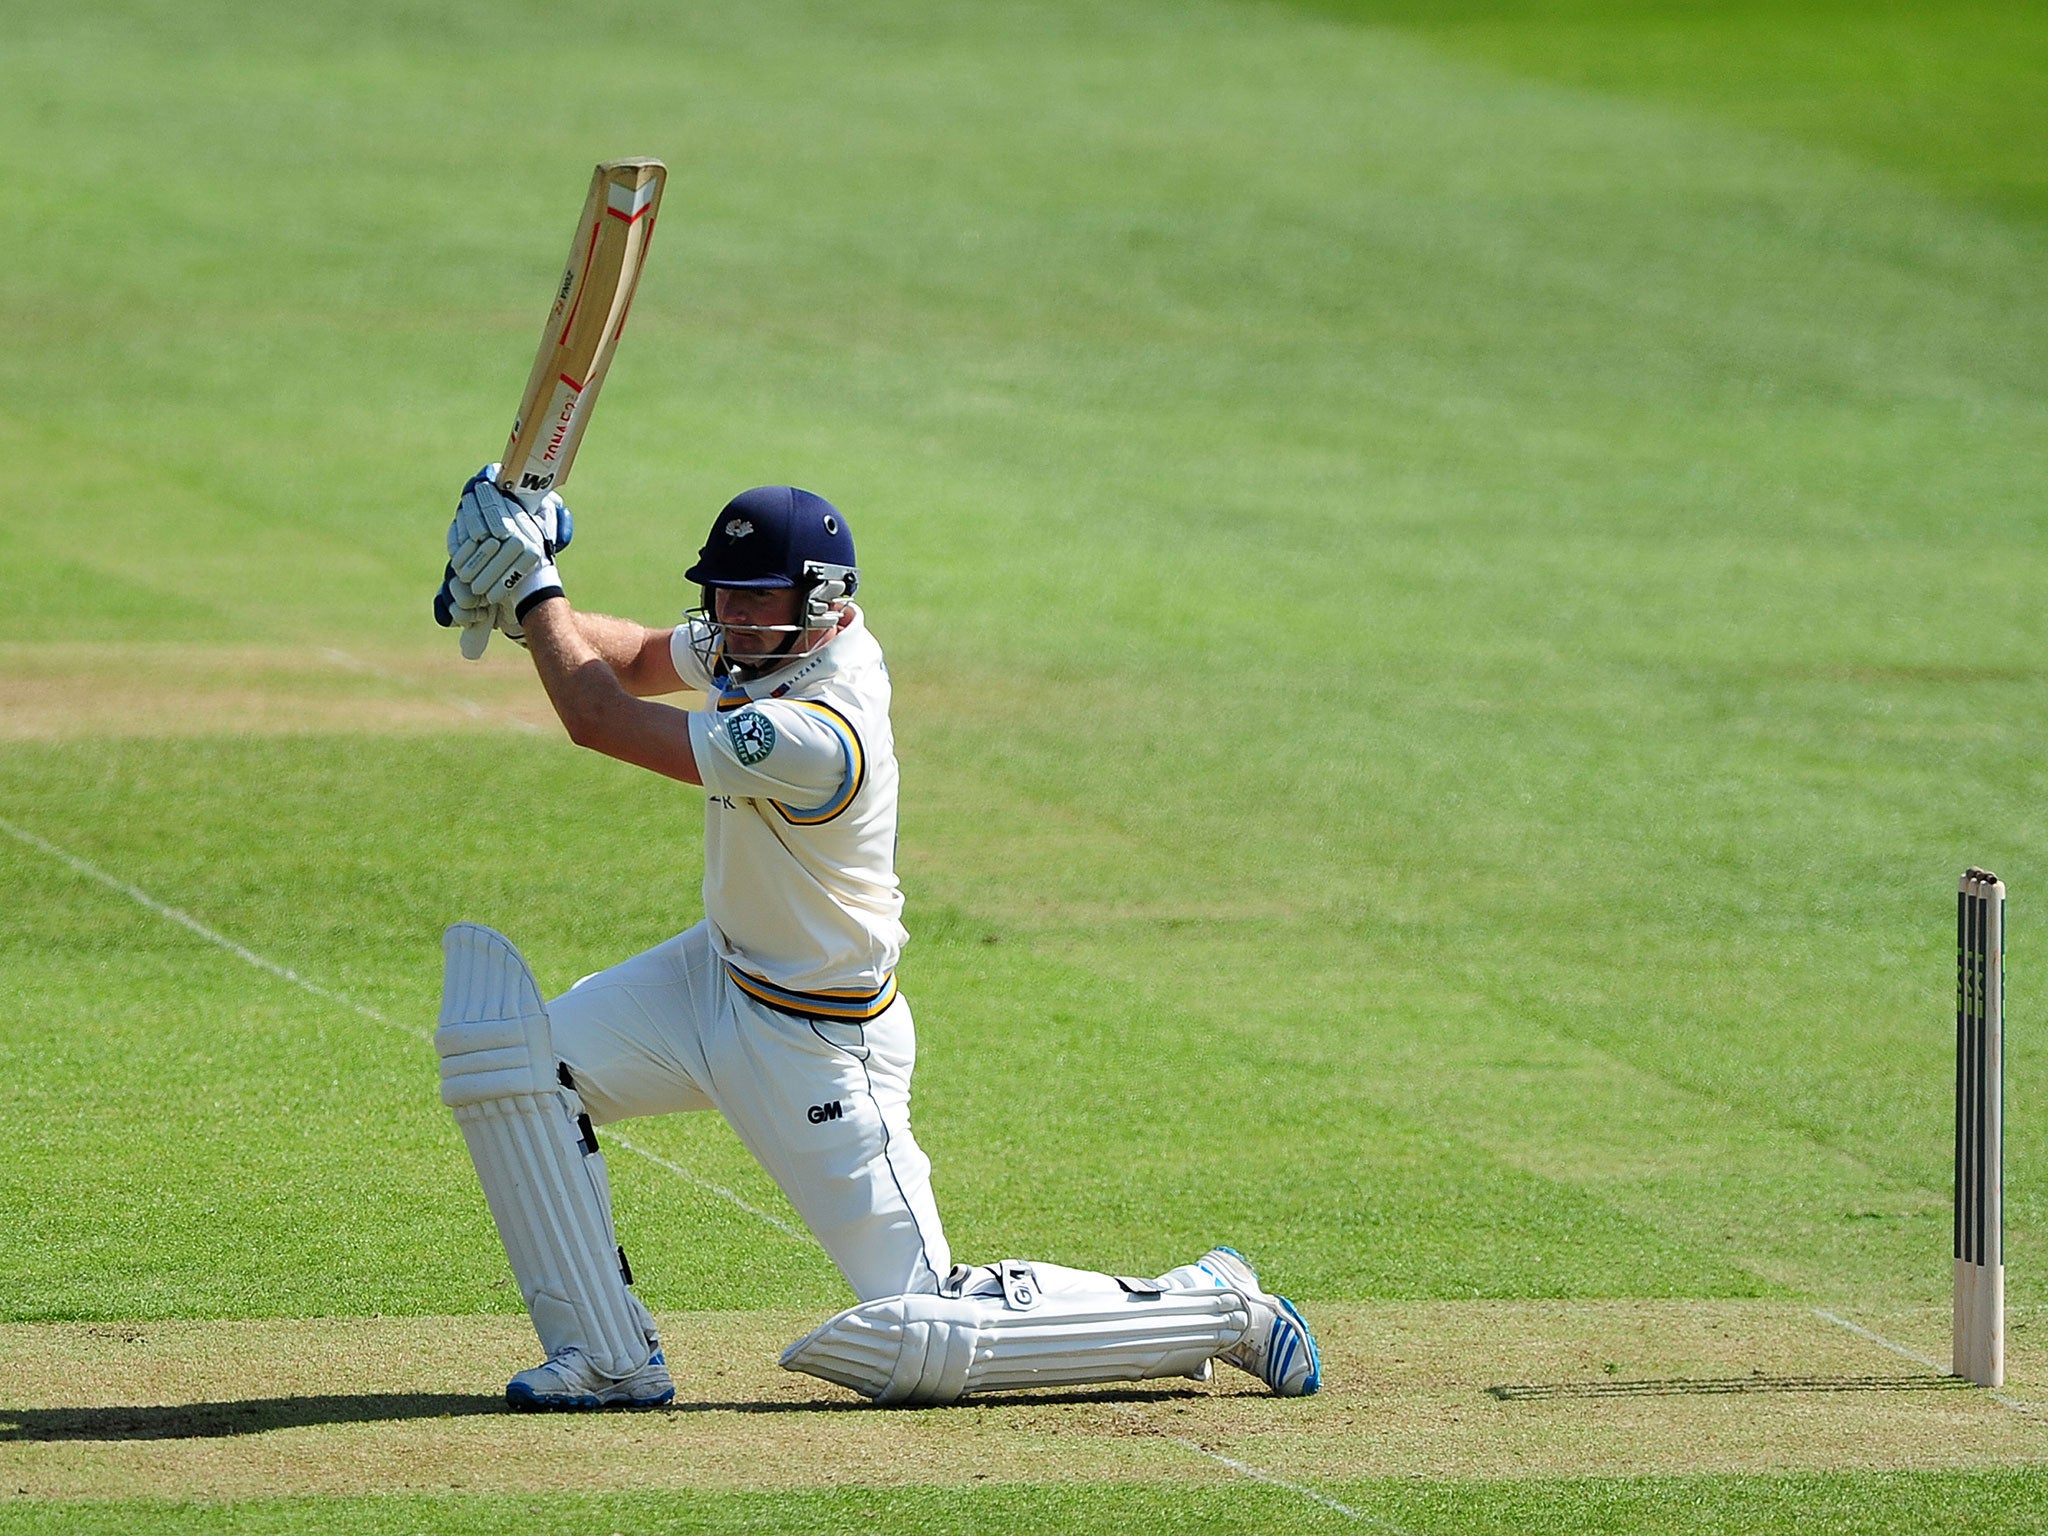 Lyth made his second double-hundred, and was 18 runs short of equalling his career-best 248